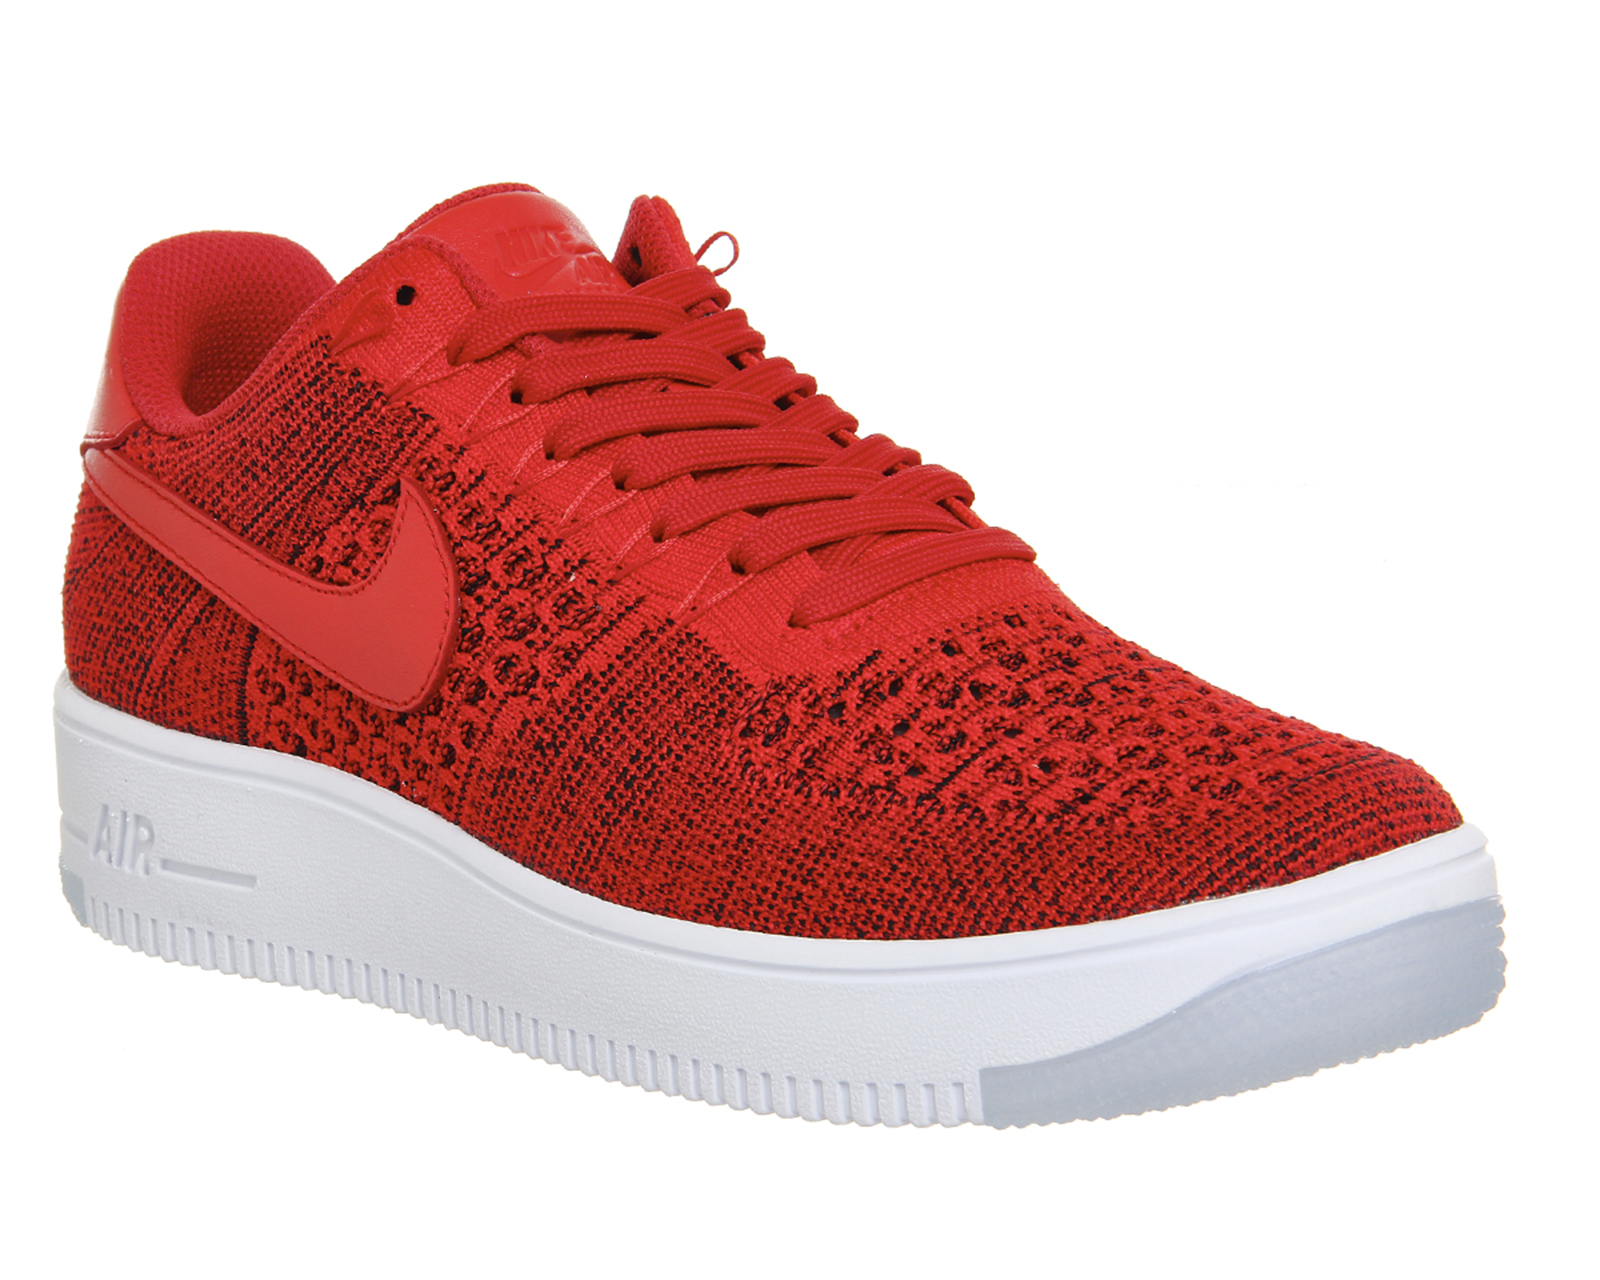 Junior Air Force 1 Flyknit Sweden, SAVE 52% - aveclumiere.com